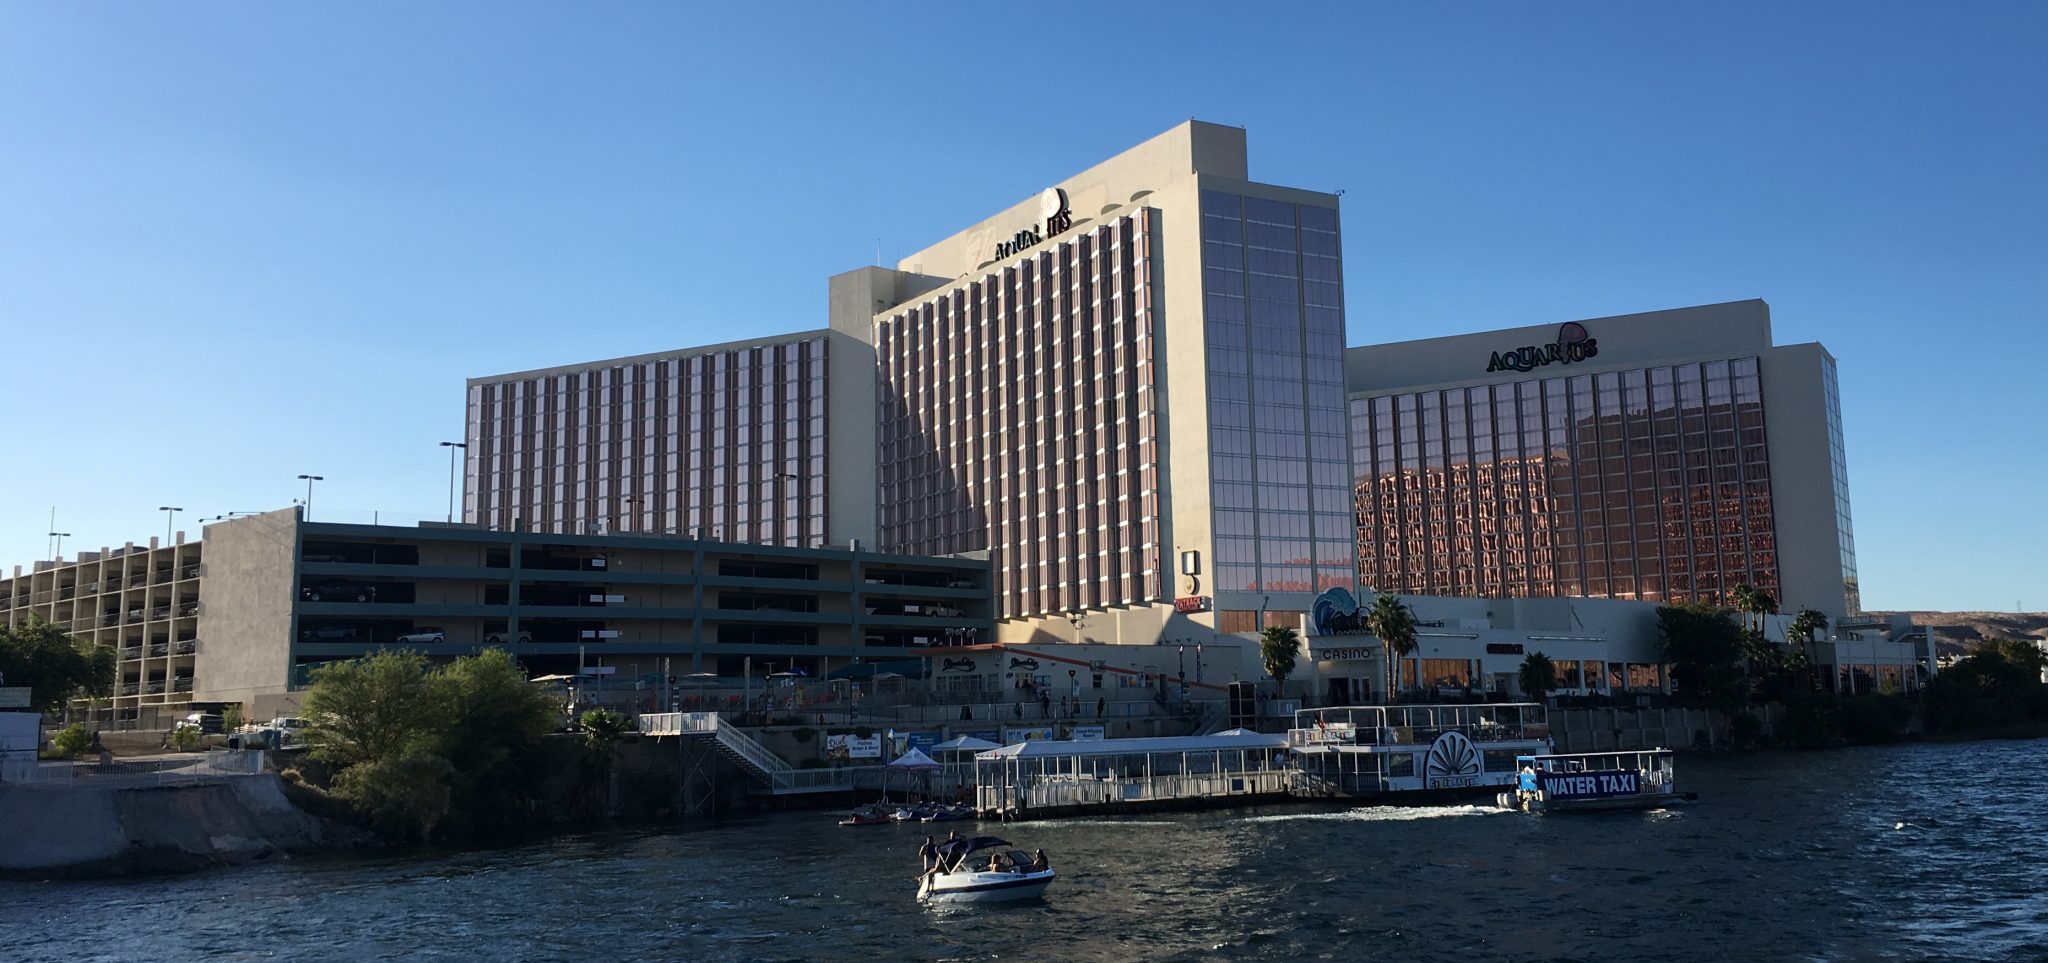 laughlin does it have mgm resort casinos